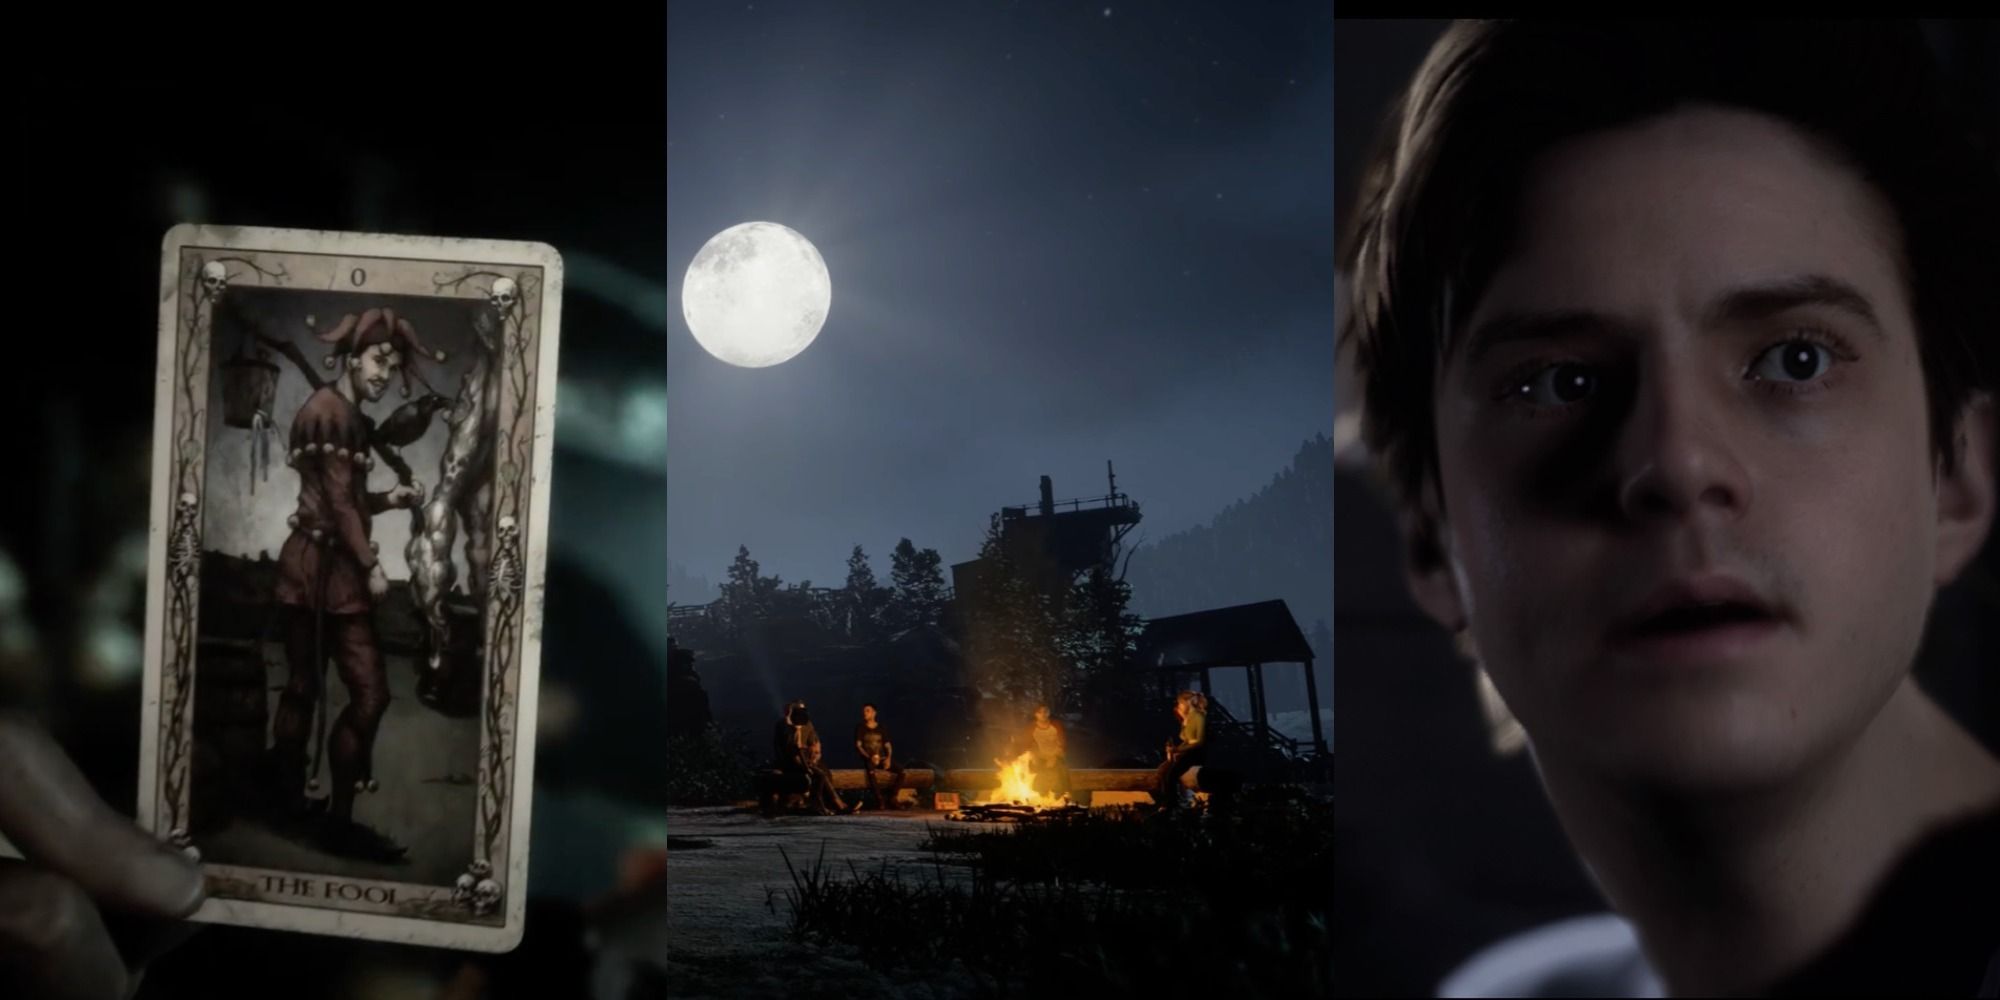 the fool card, counselors by the fire, and dylan closeup in the quarry